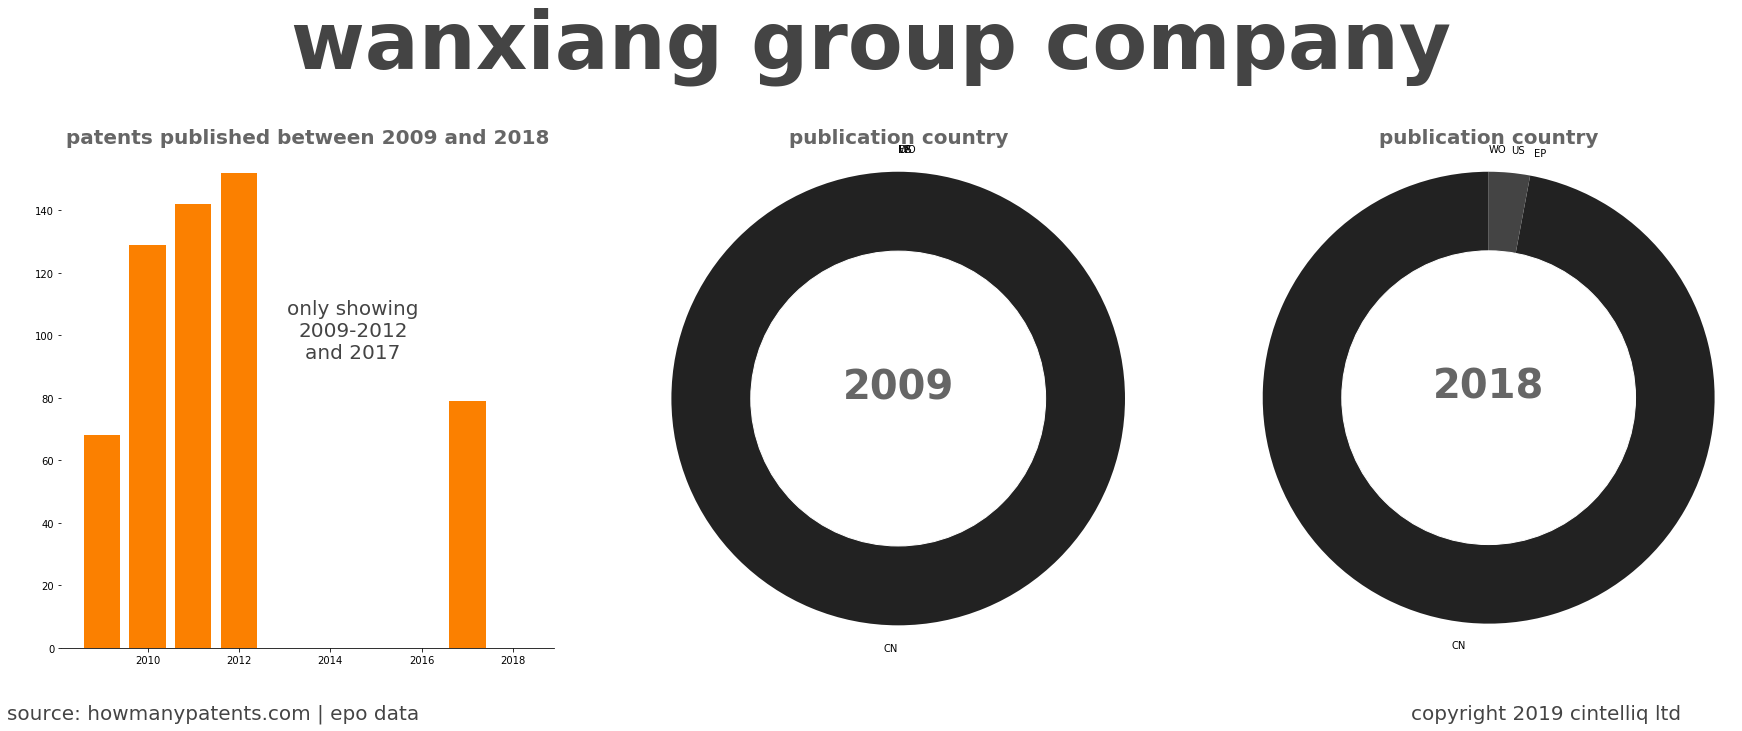 summary of patents for Wanxiang Group Company